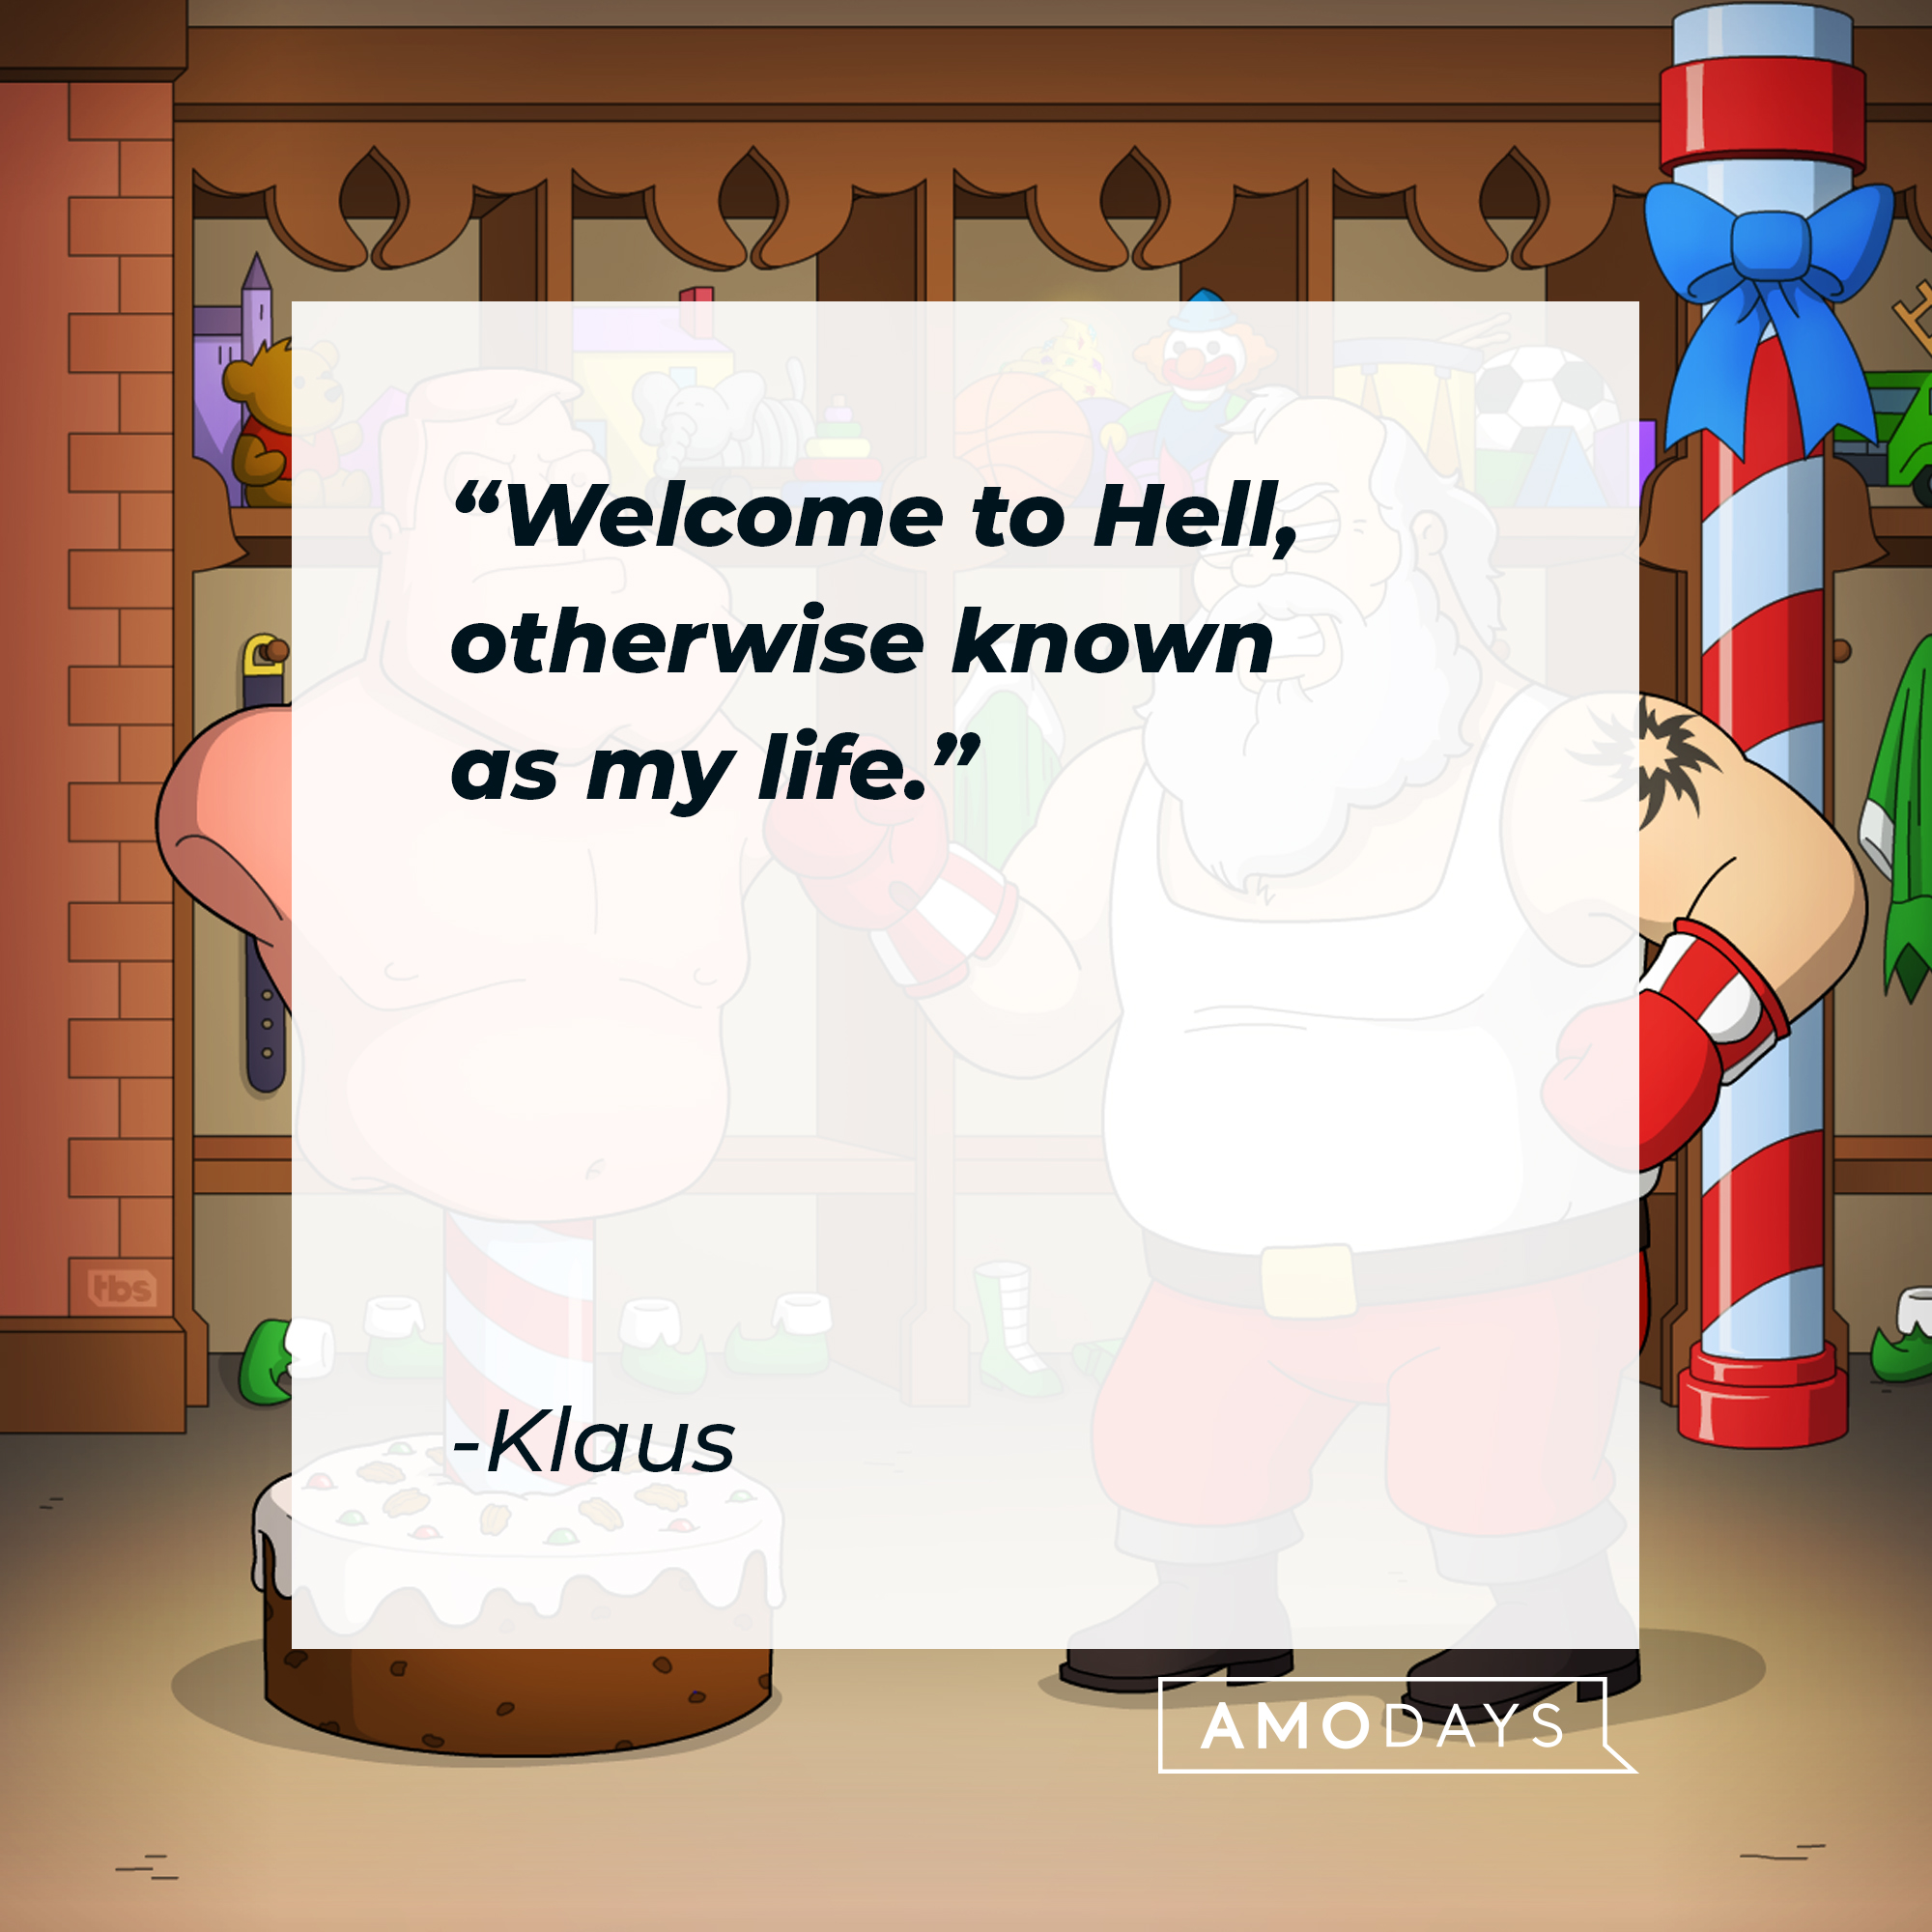 Klaus's quote: "Welcome to Hell, otherwise known as my life." | Source: facebook.com/AmericanDad